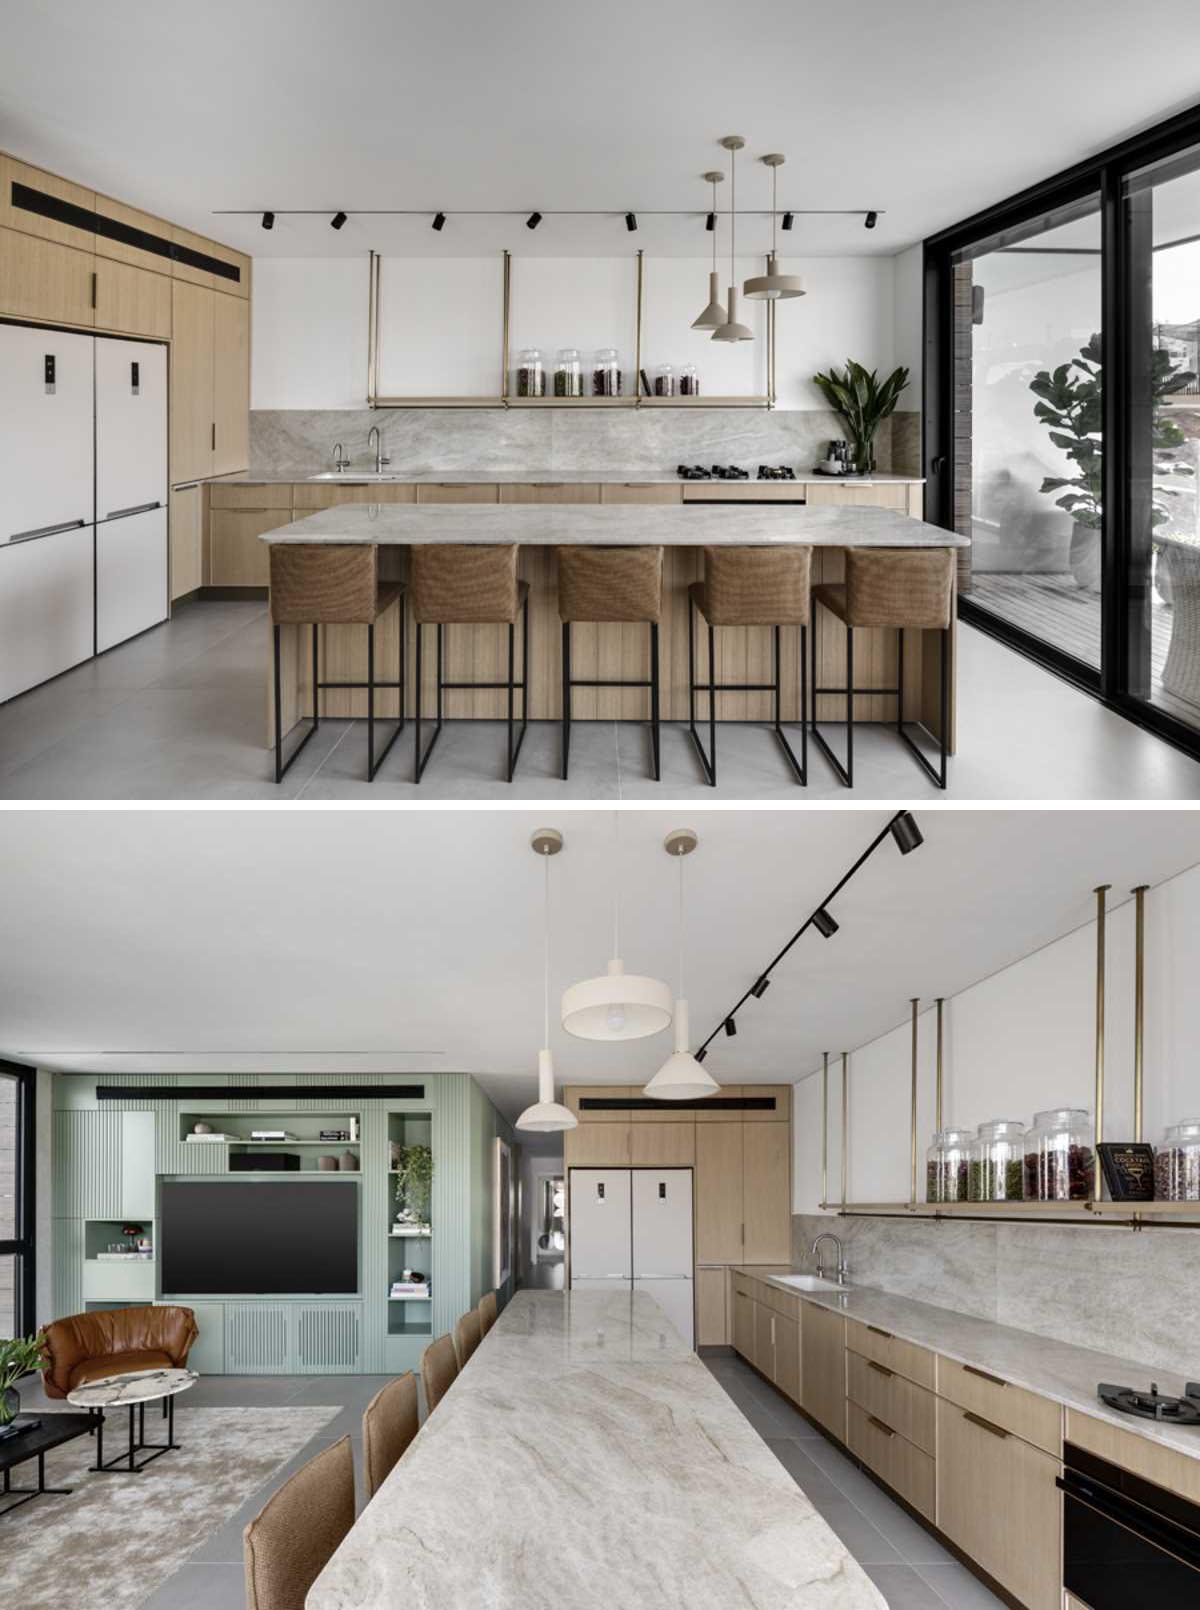 This modern kitchen with a natural clolor palette includes minimalist shelf hanging from the ceiling instead of upper cabinets, keeps the space feeling open, and offers the chance to display filled glass jars.